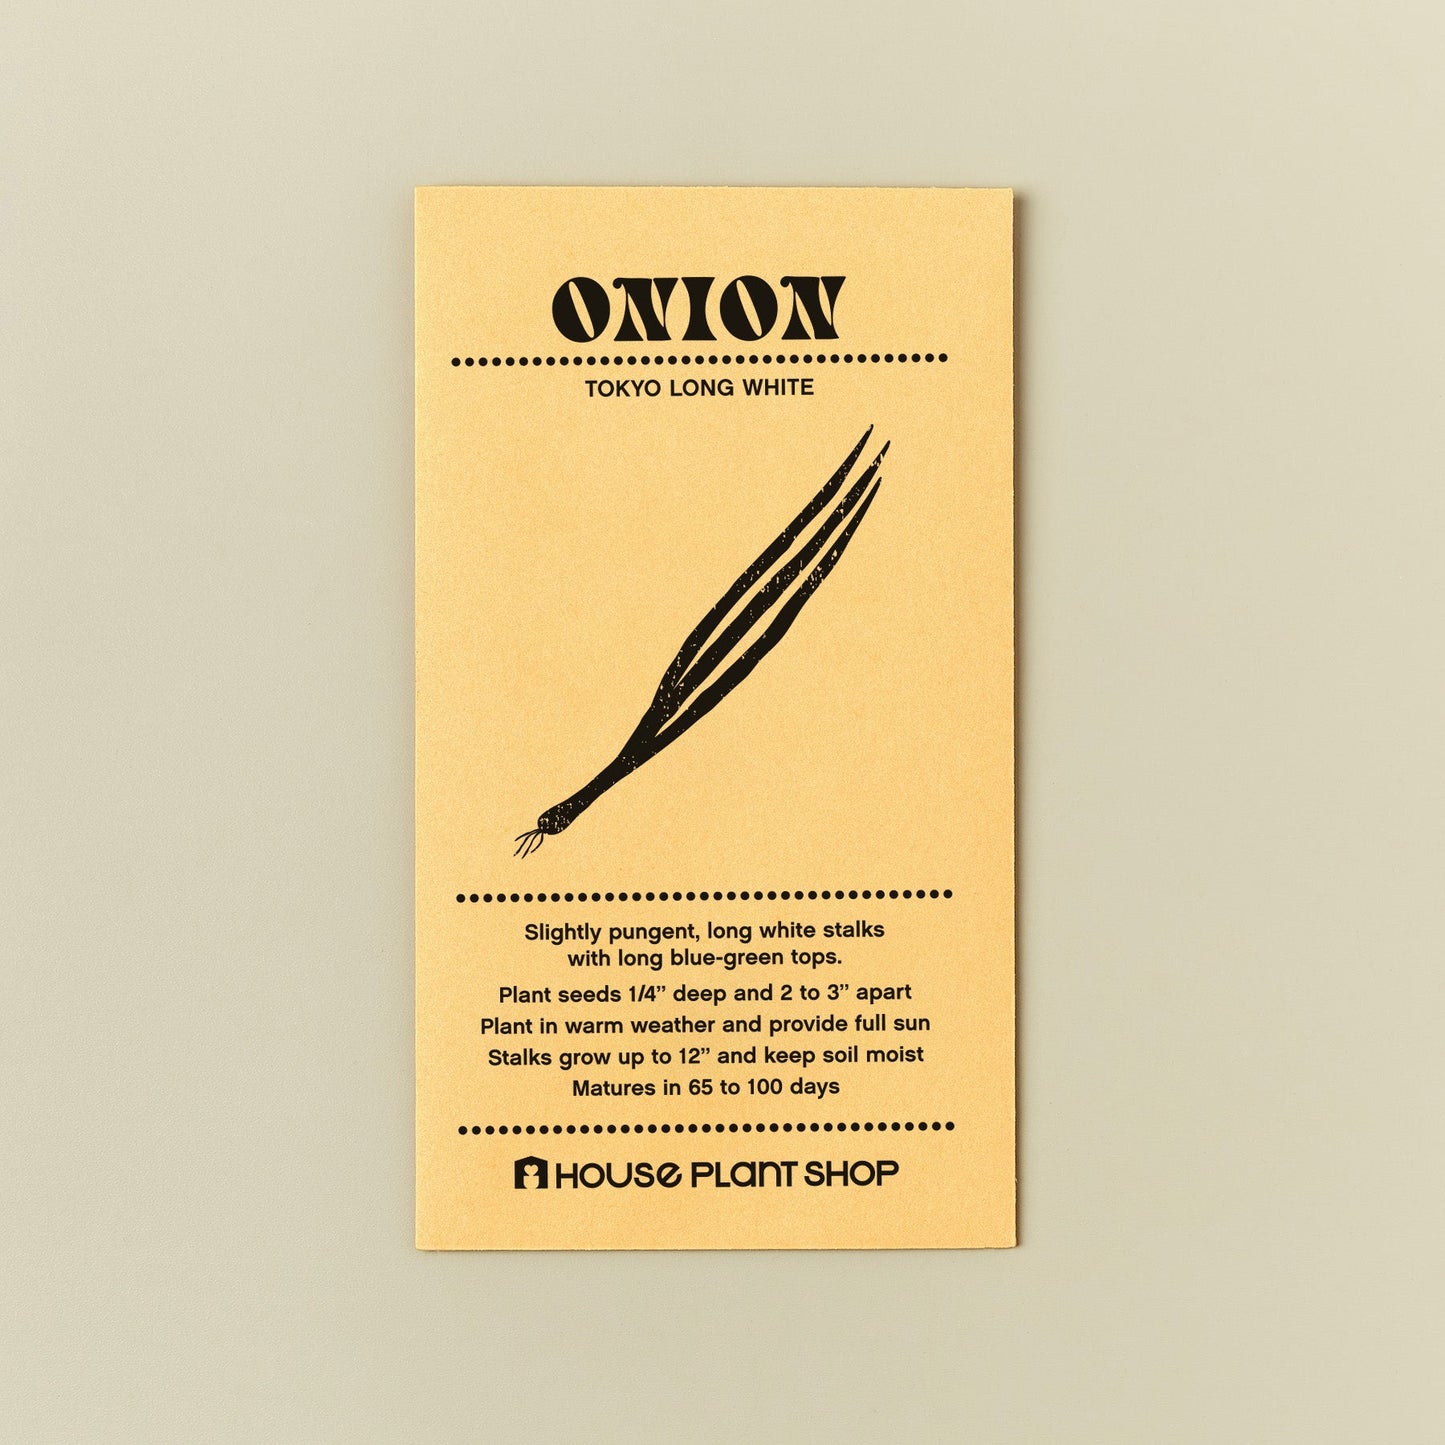 Onion 'Tokyo Long White' Seed Packet